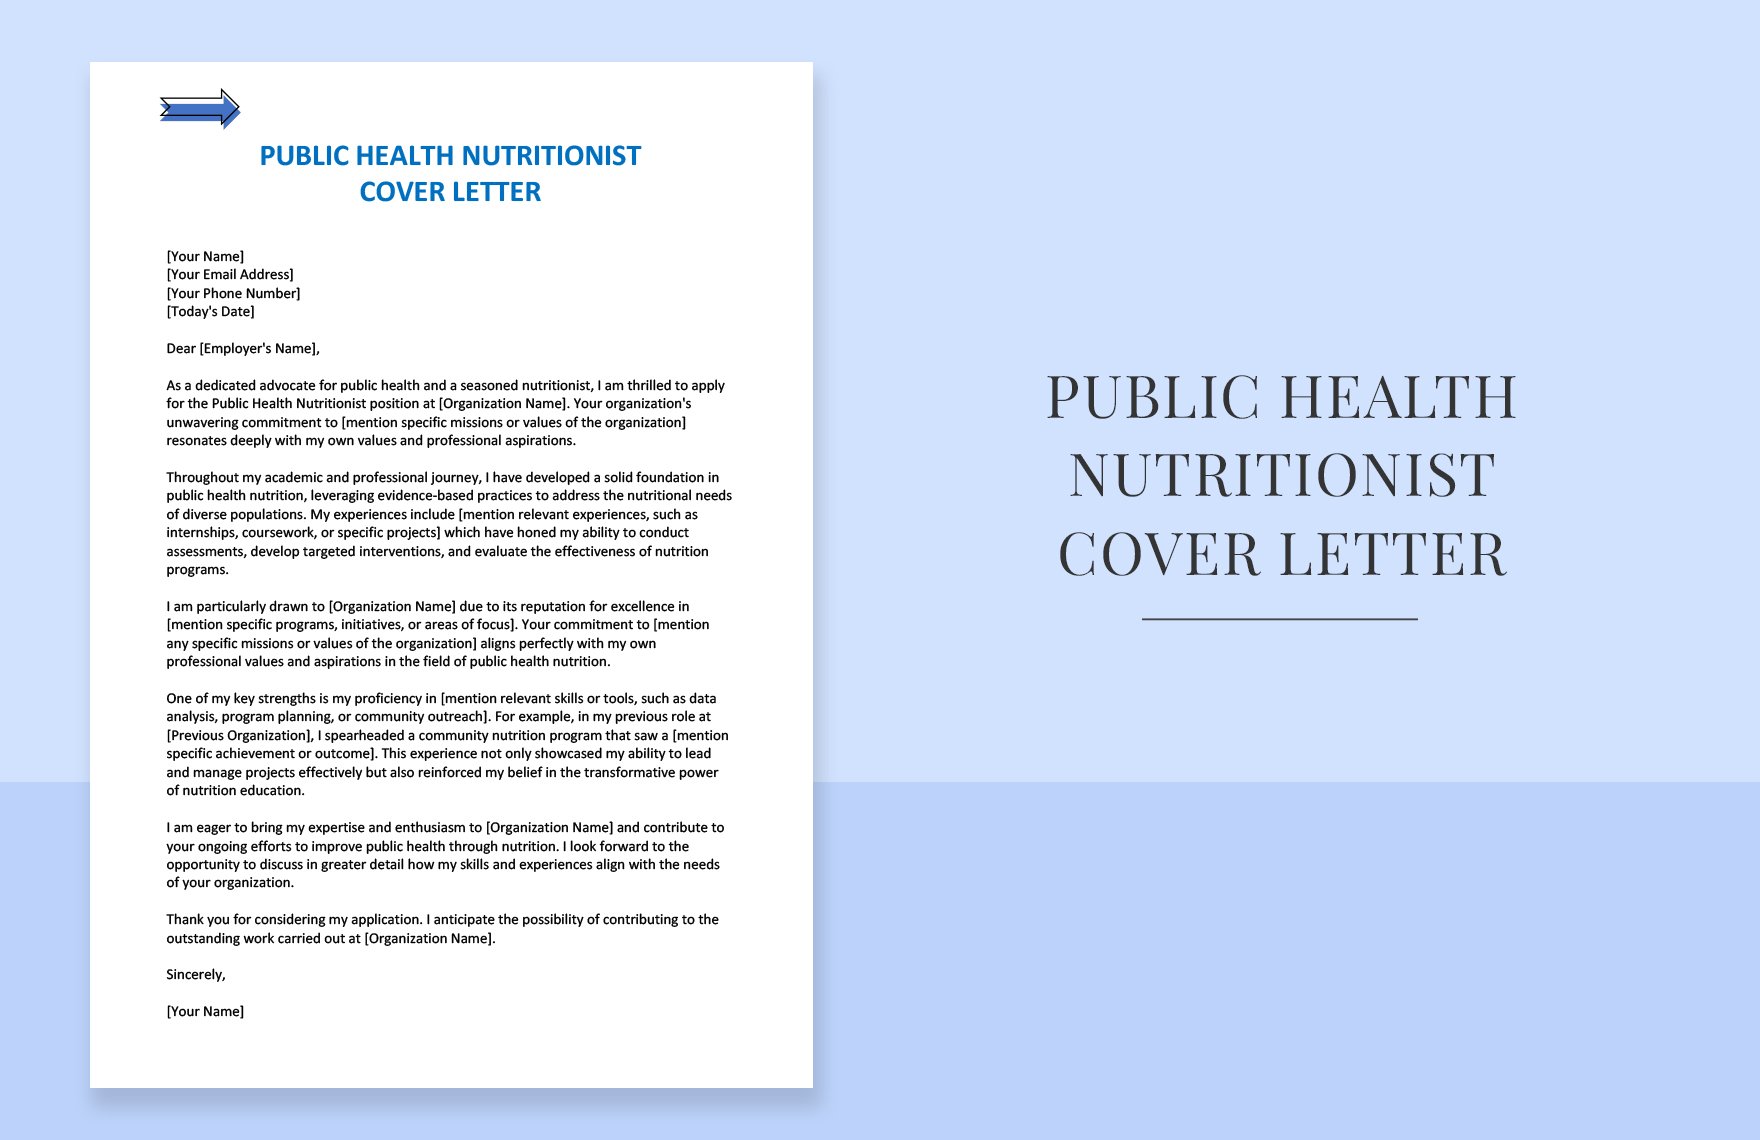 Public Health Nutritionist Cover Letter in Word, Google Docs